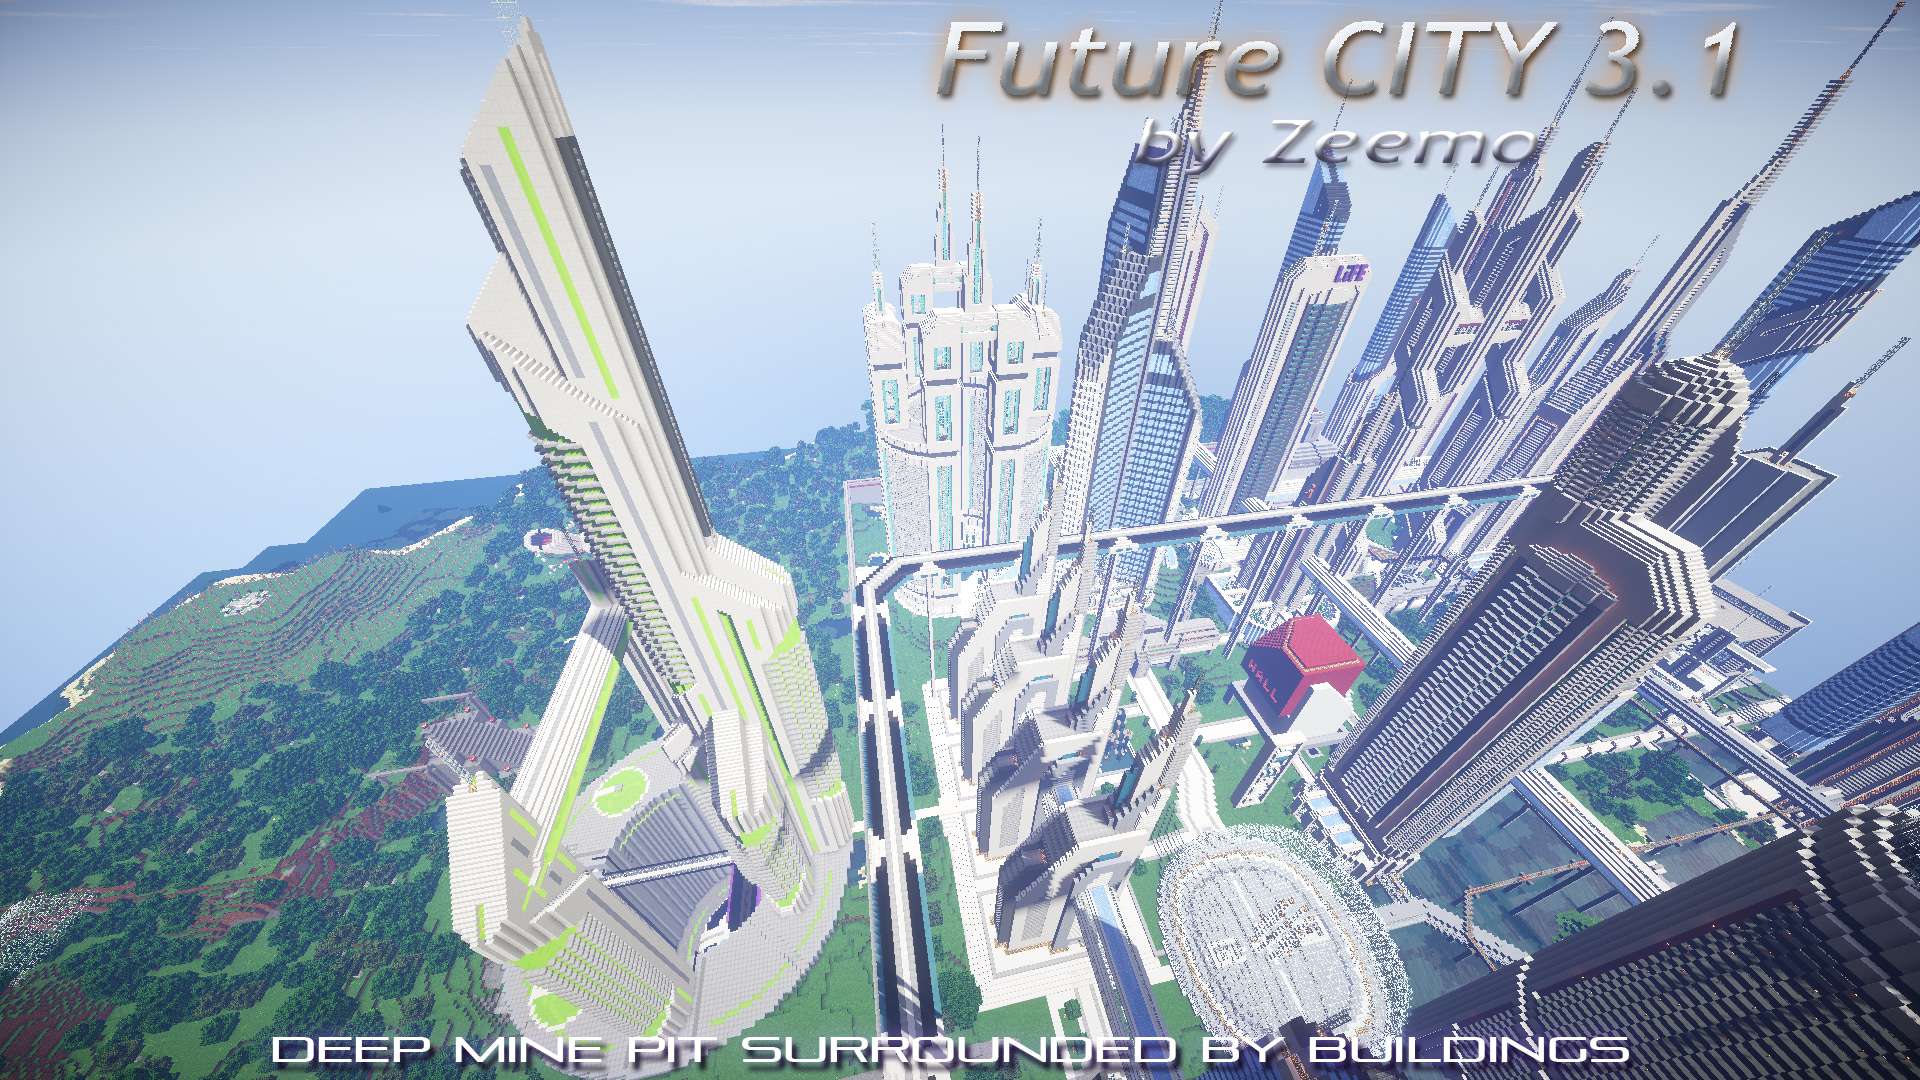 Minecraft Future City by Zeemo 3.1 skyscrapers tall 